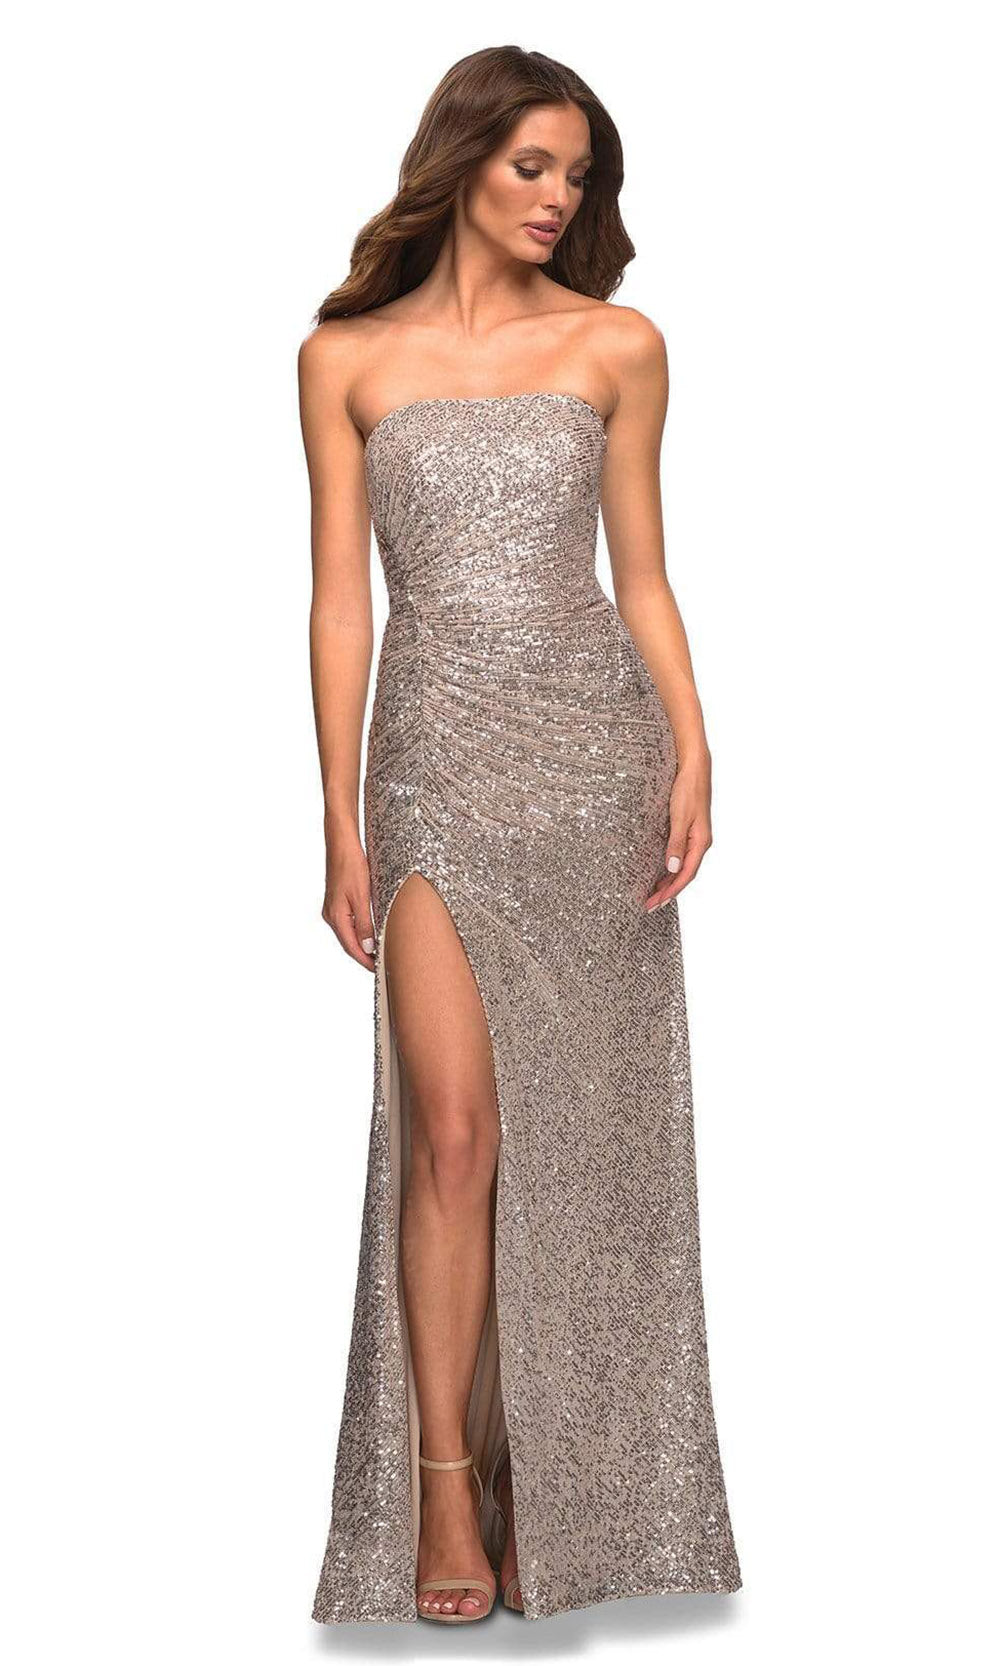 La Femme - 29675 Strapless Sequin Gown In Silver & Gray